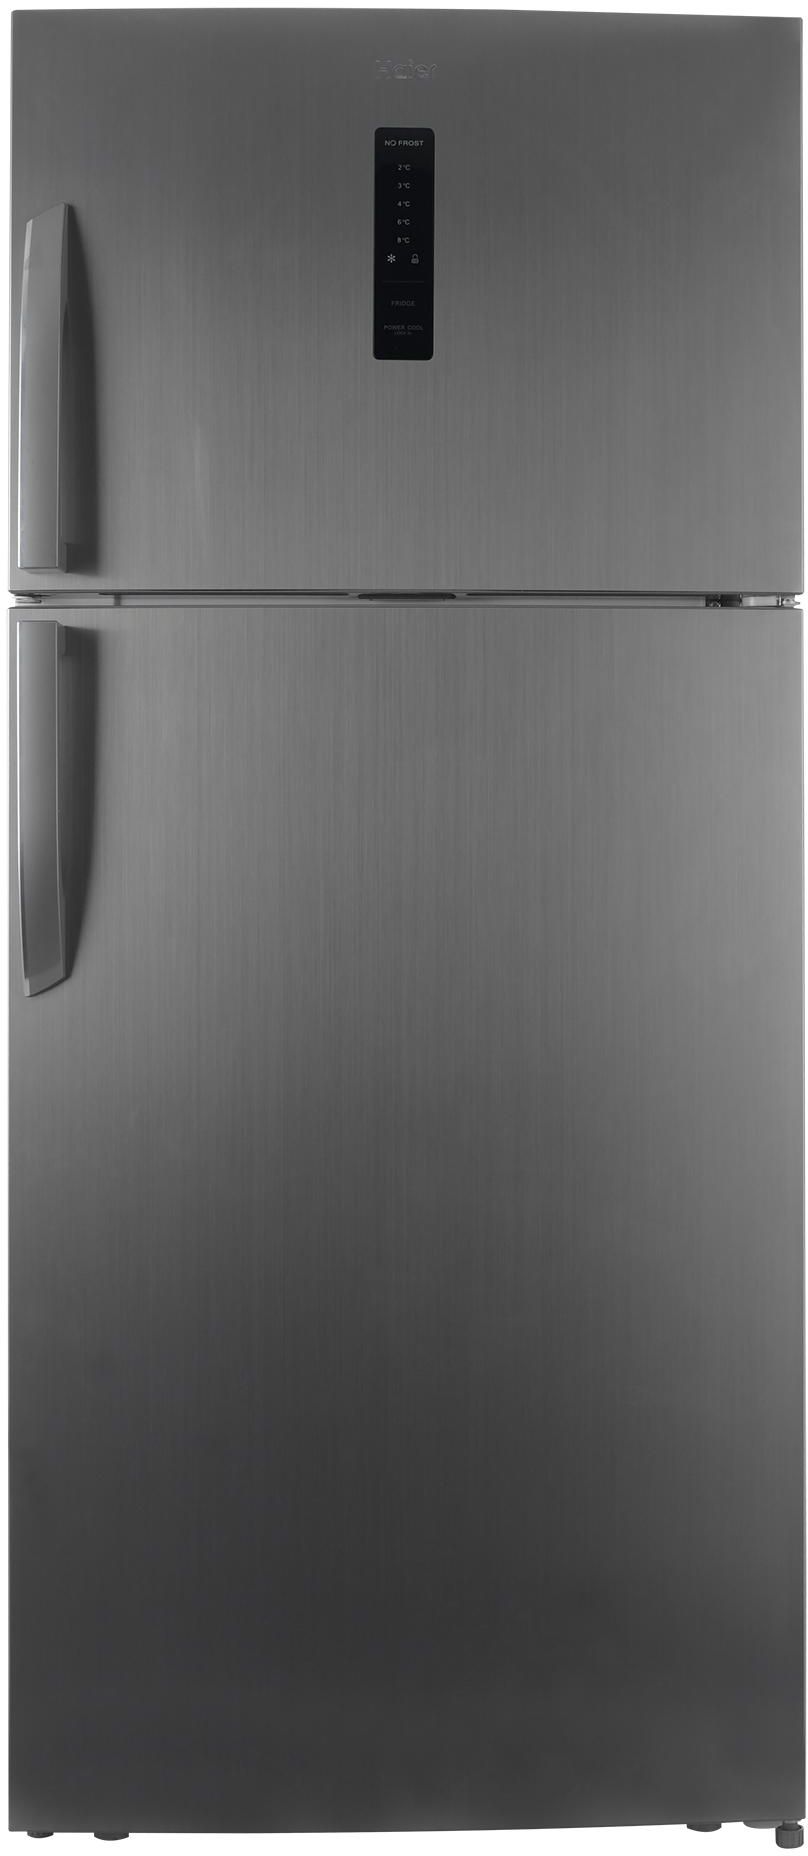 Haier, Refrigerator, 18.6 Cu.ft/527 Ltrs, Silver